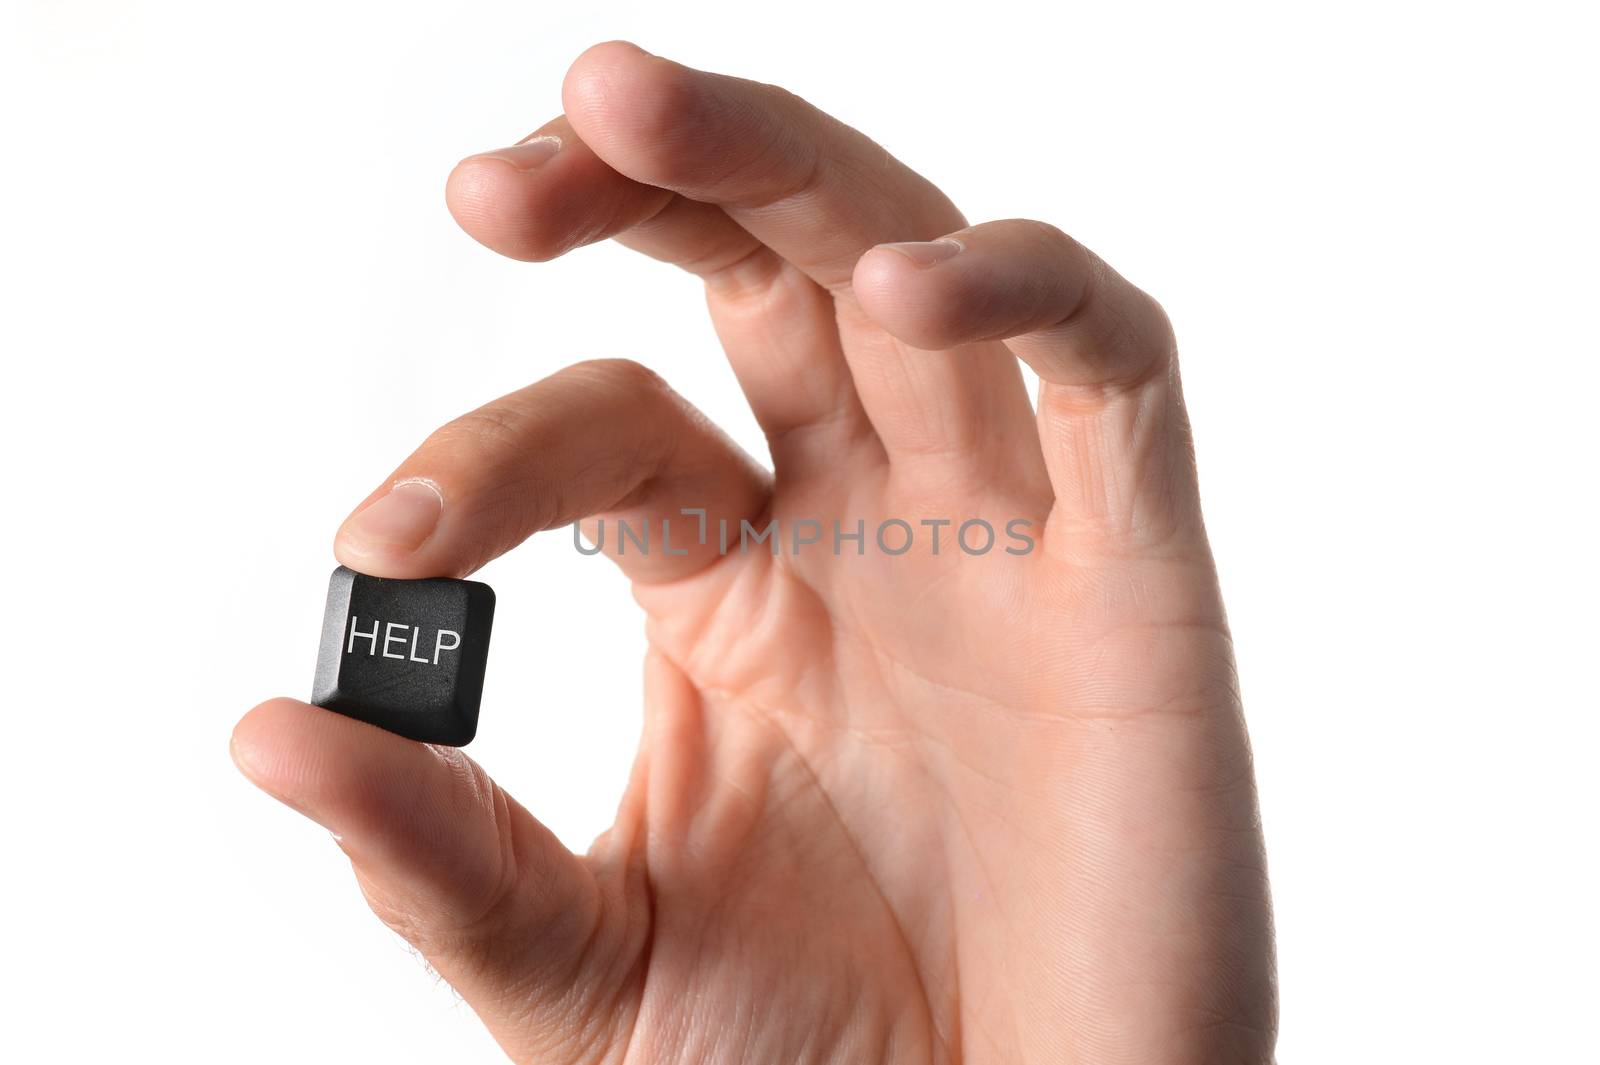 close up of a hand holding a help key from a computer keyboard on a white background